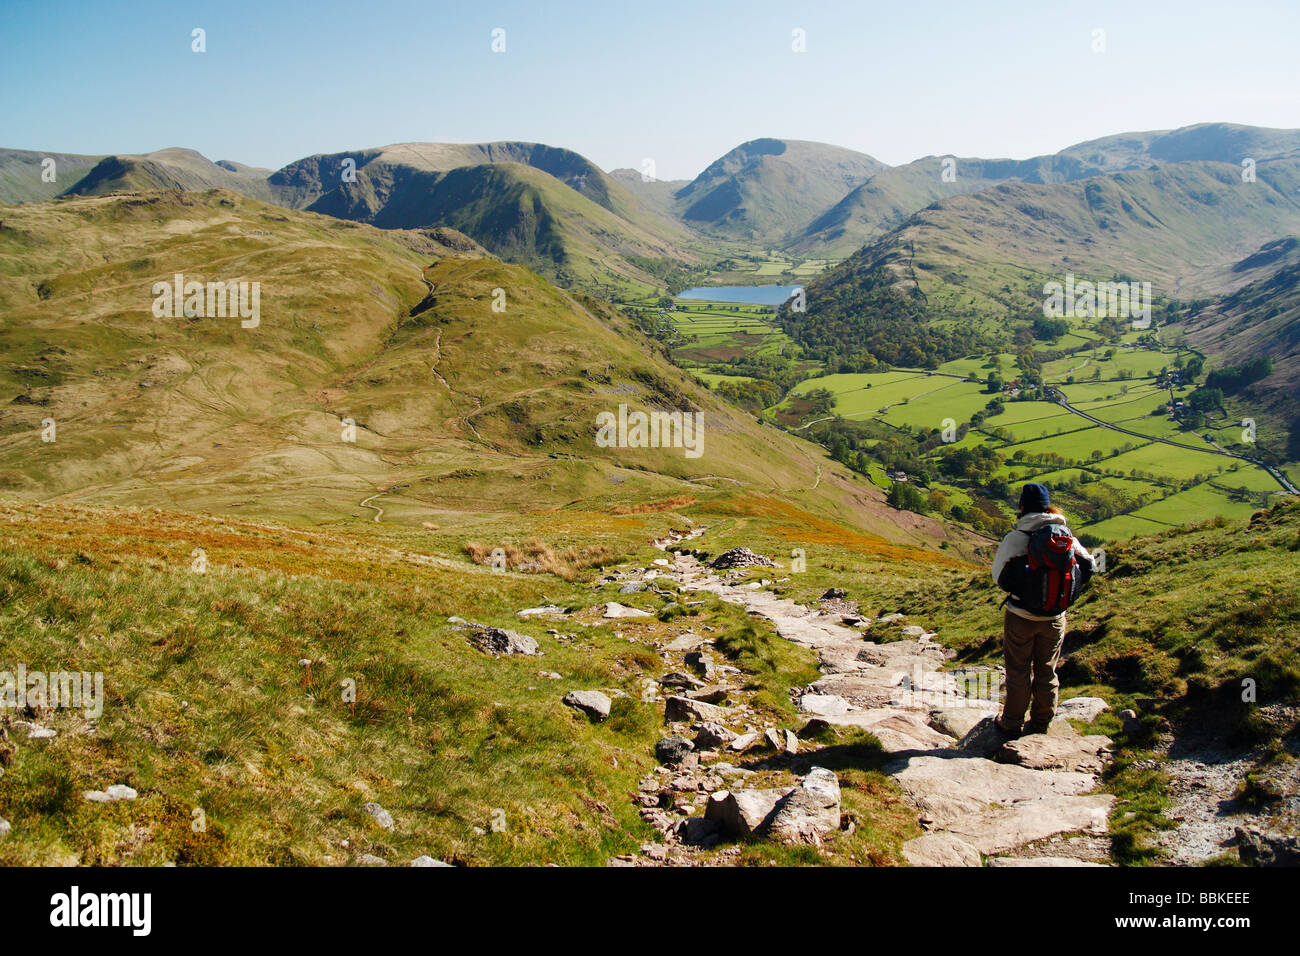 Female hiker on the descent to Patterdale and Glenridding from summit of Place Fell near Ullswater. Stock Photo